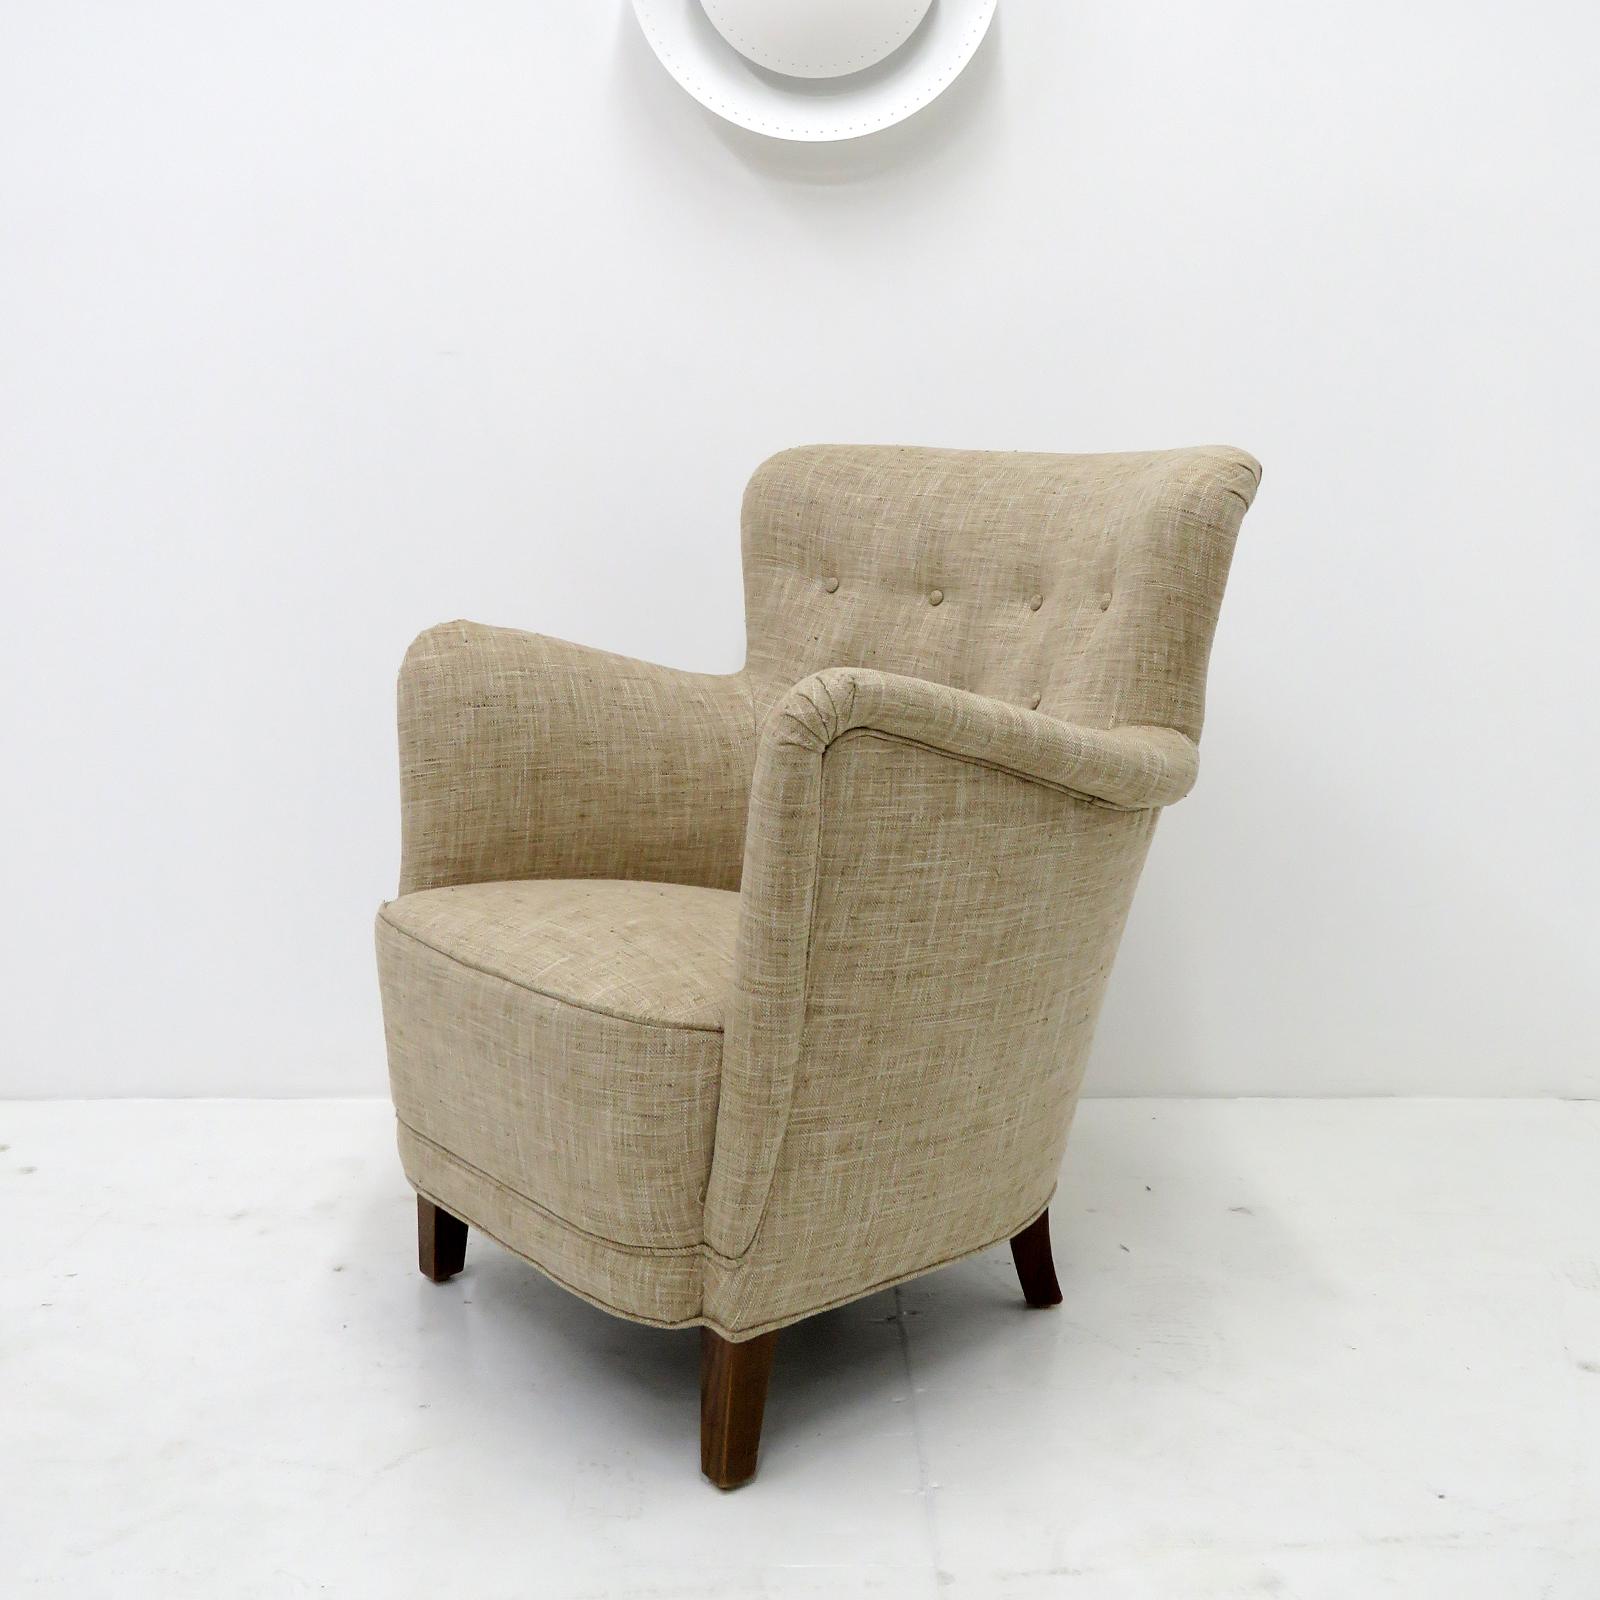 Stained Danish Modern Lounge Club Chair, 1940